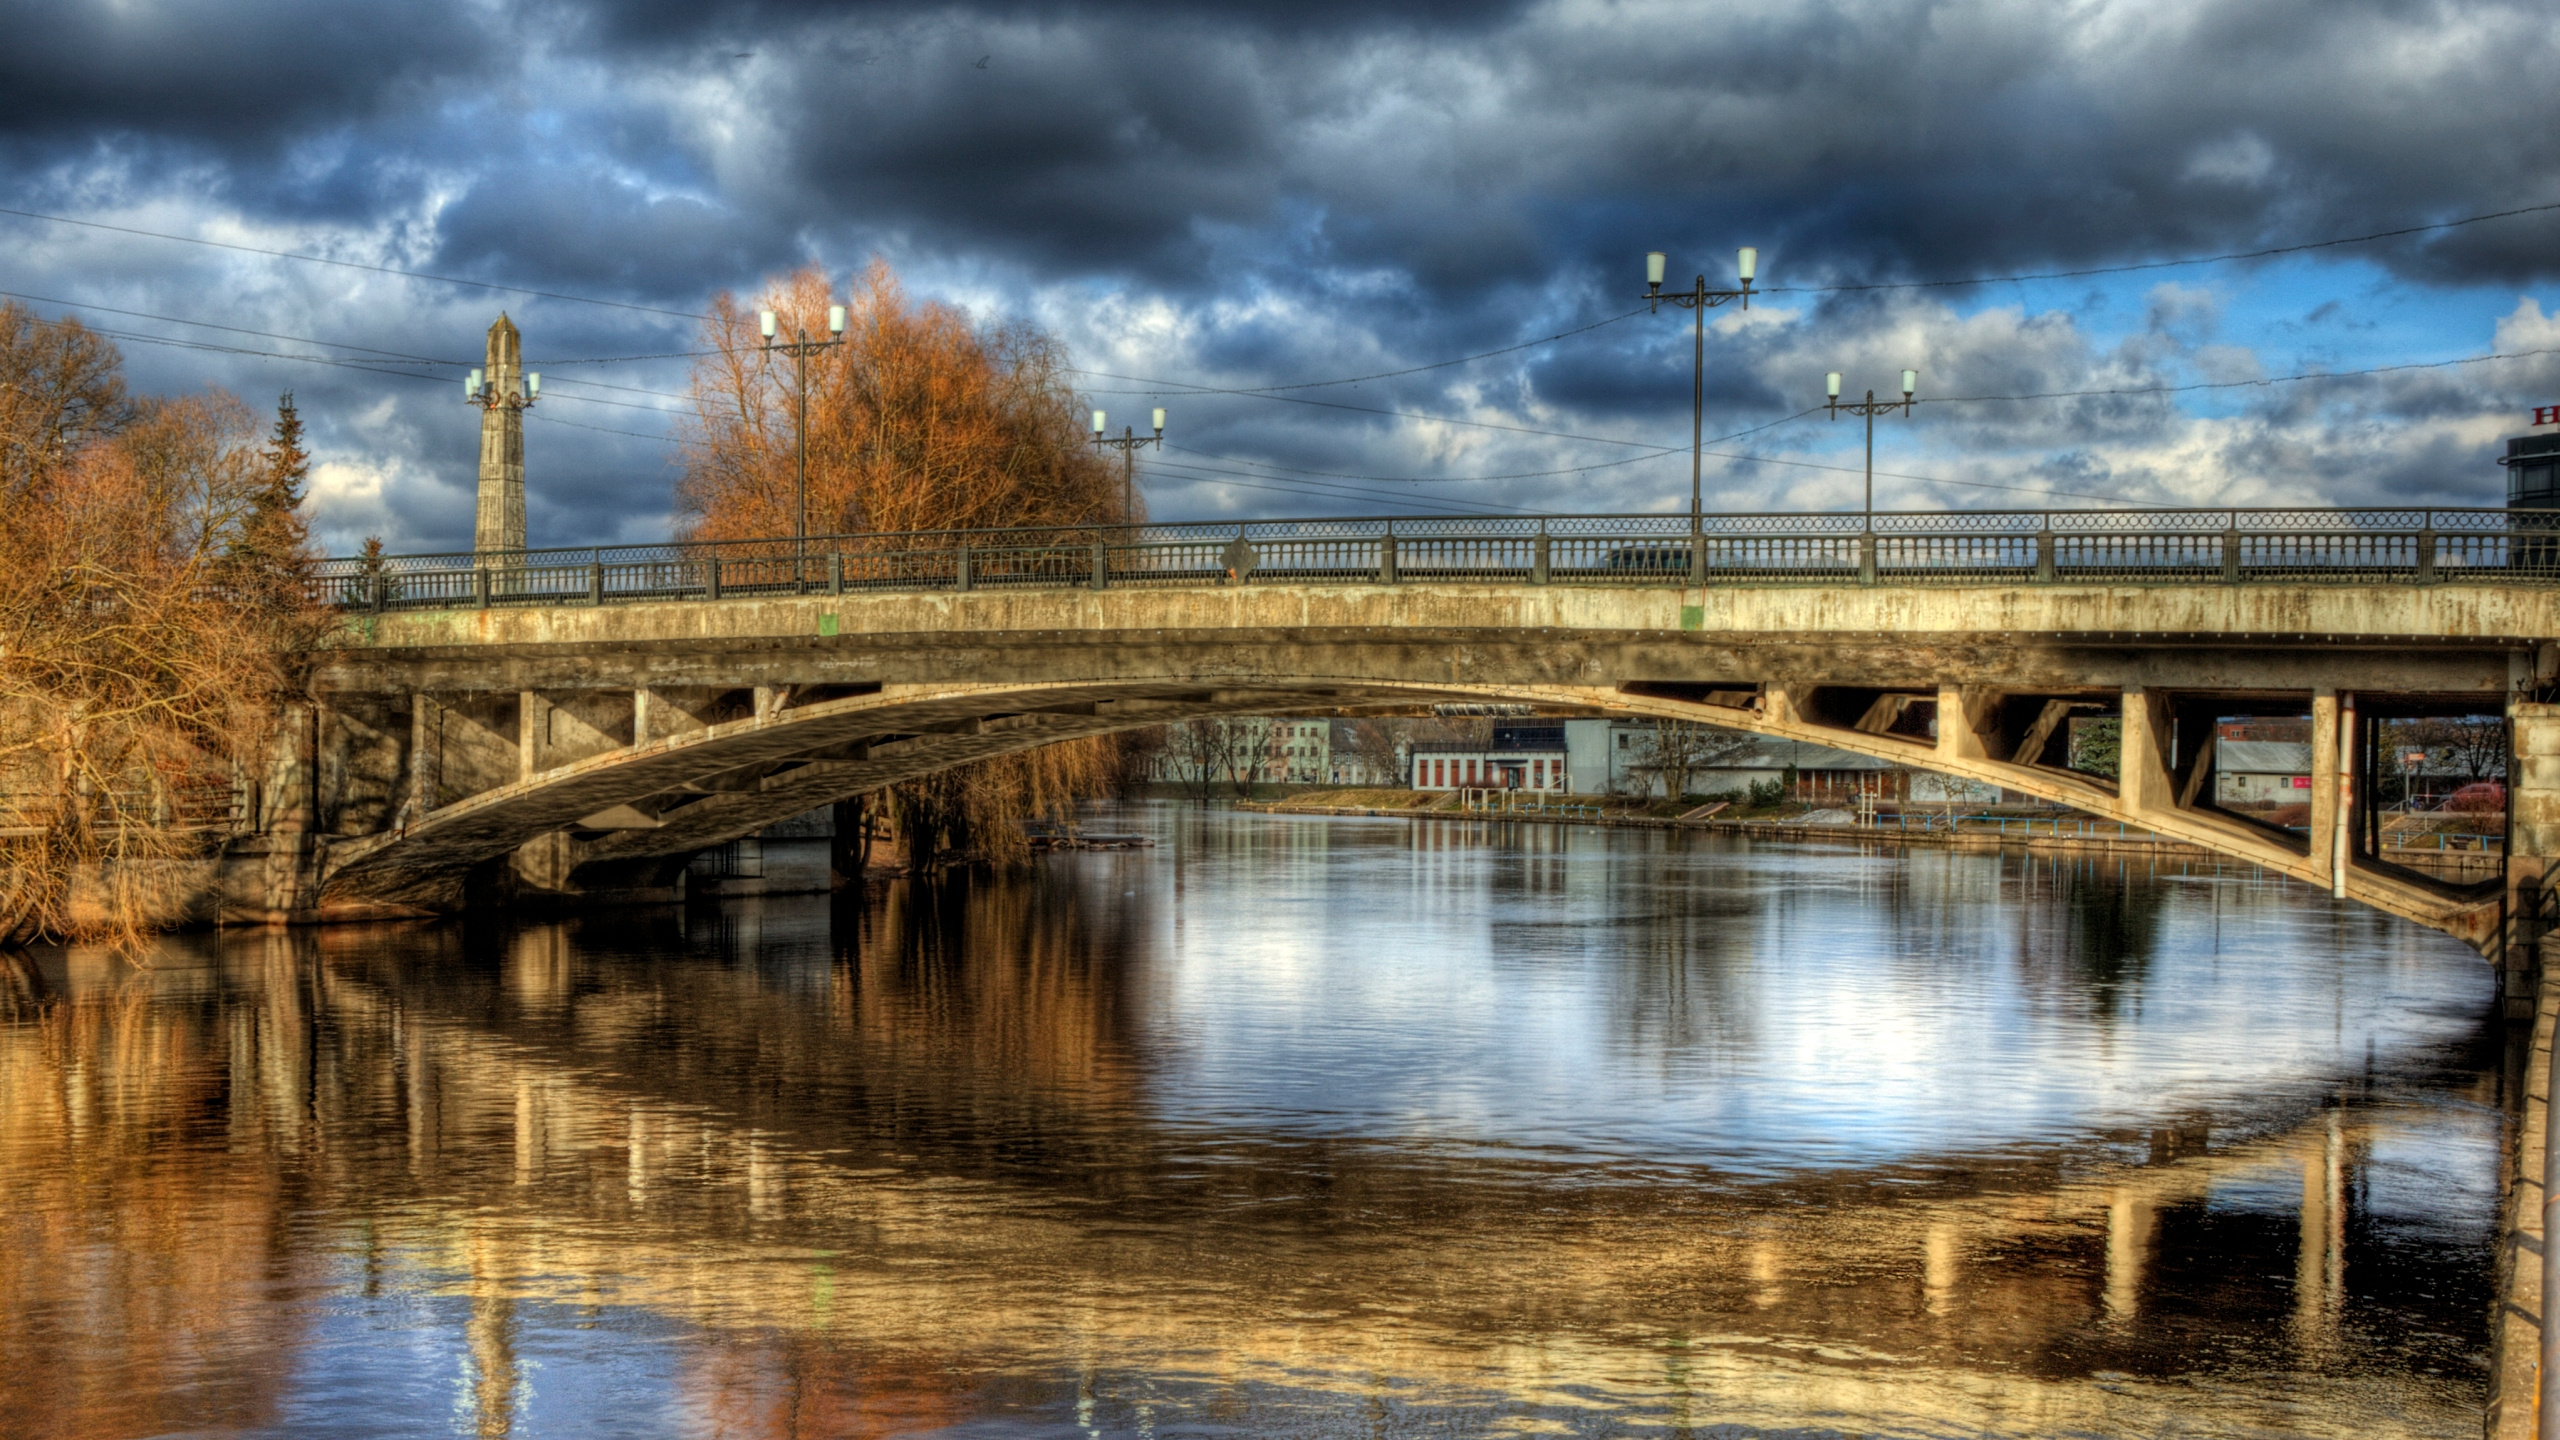 Brown Concrete Bridge Over River Under Cloudy Sky During Daytime. Wallpaper in 2560x1440 Resolution